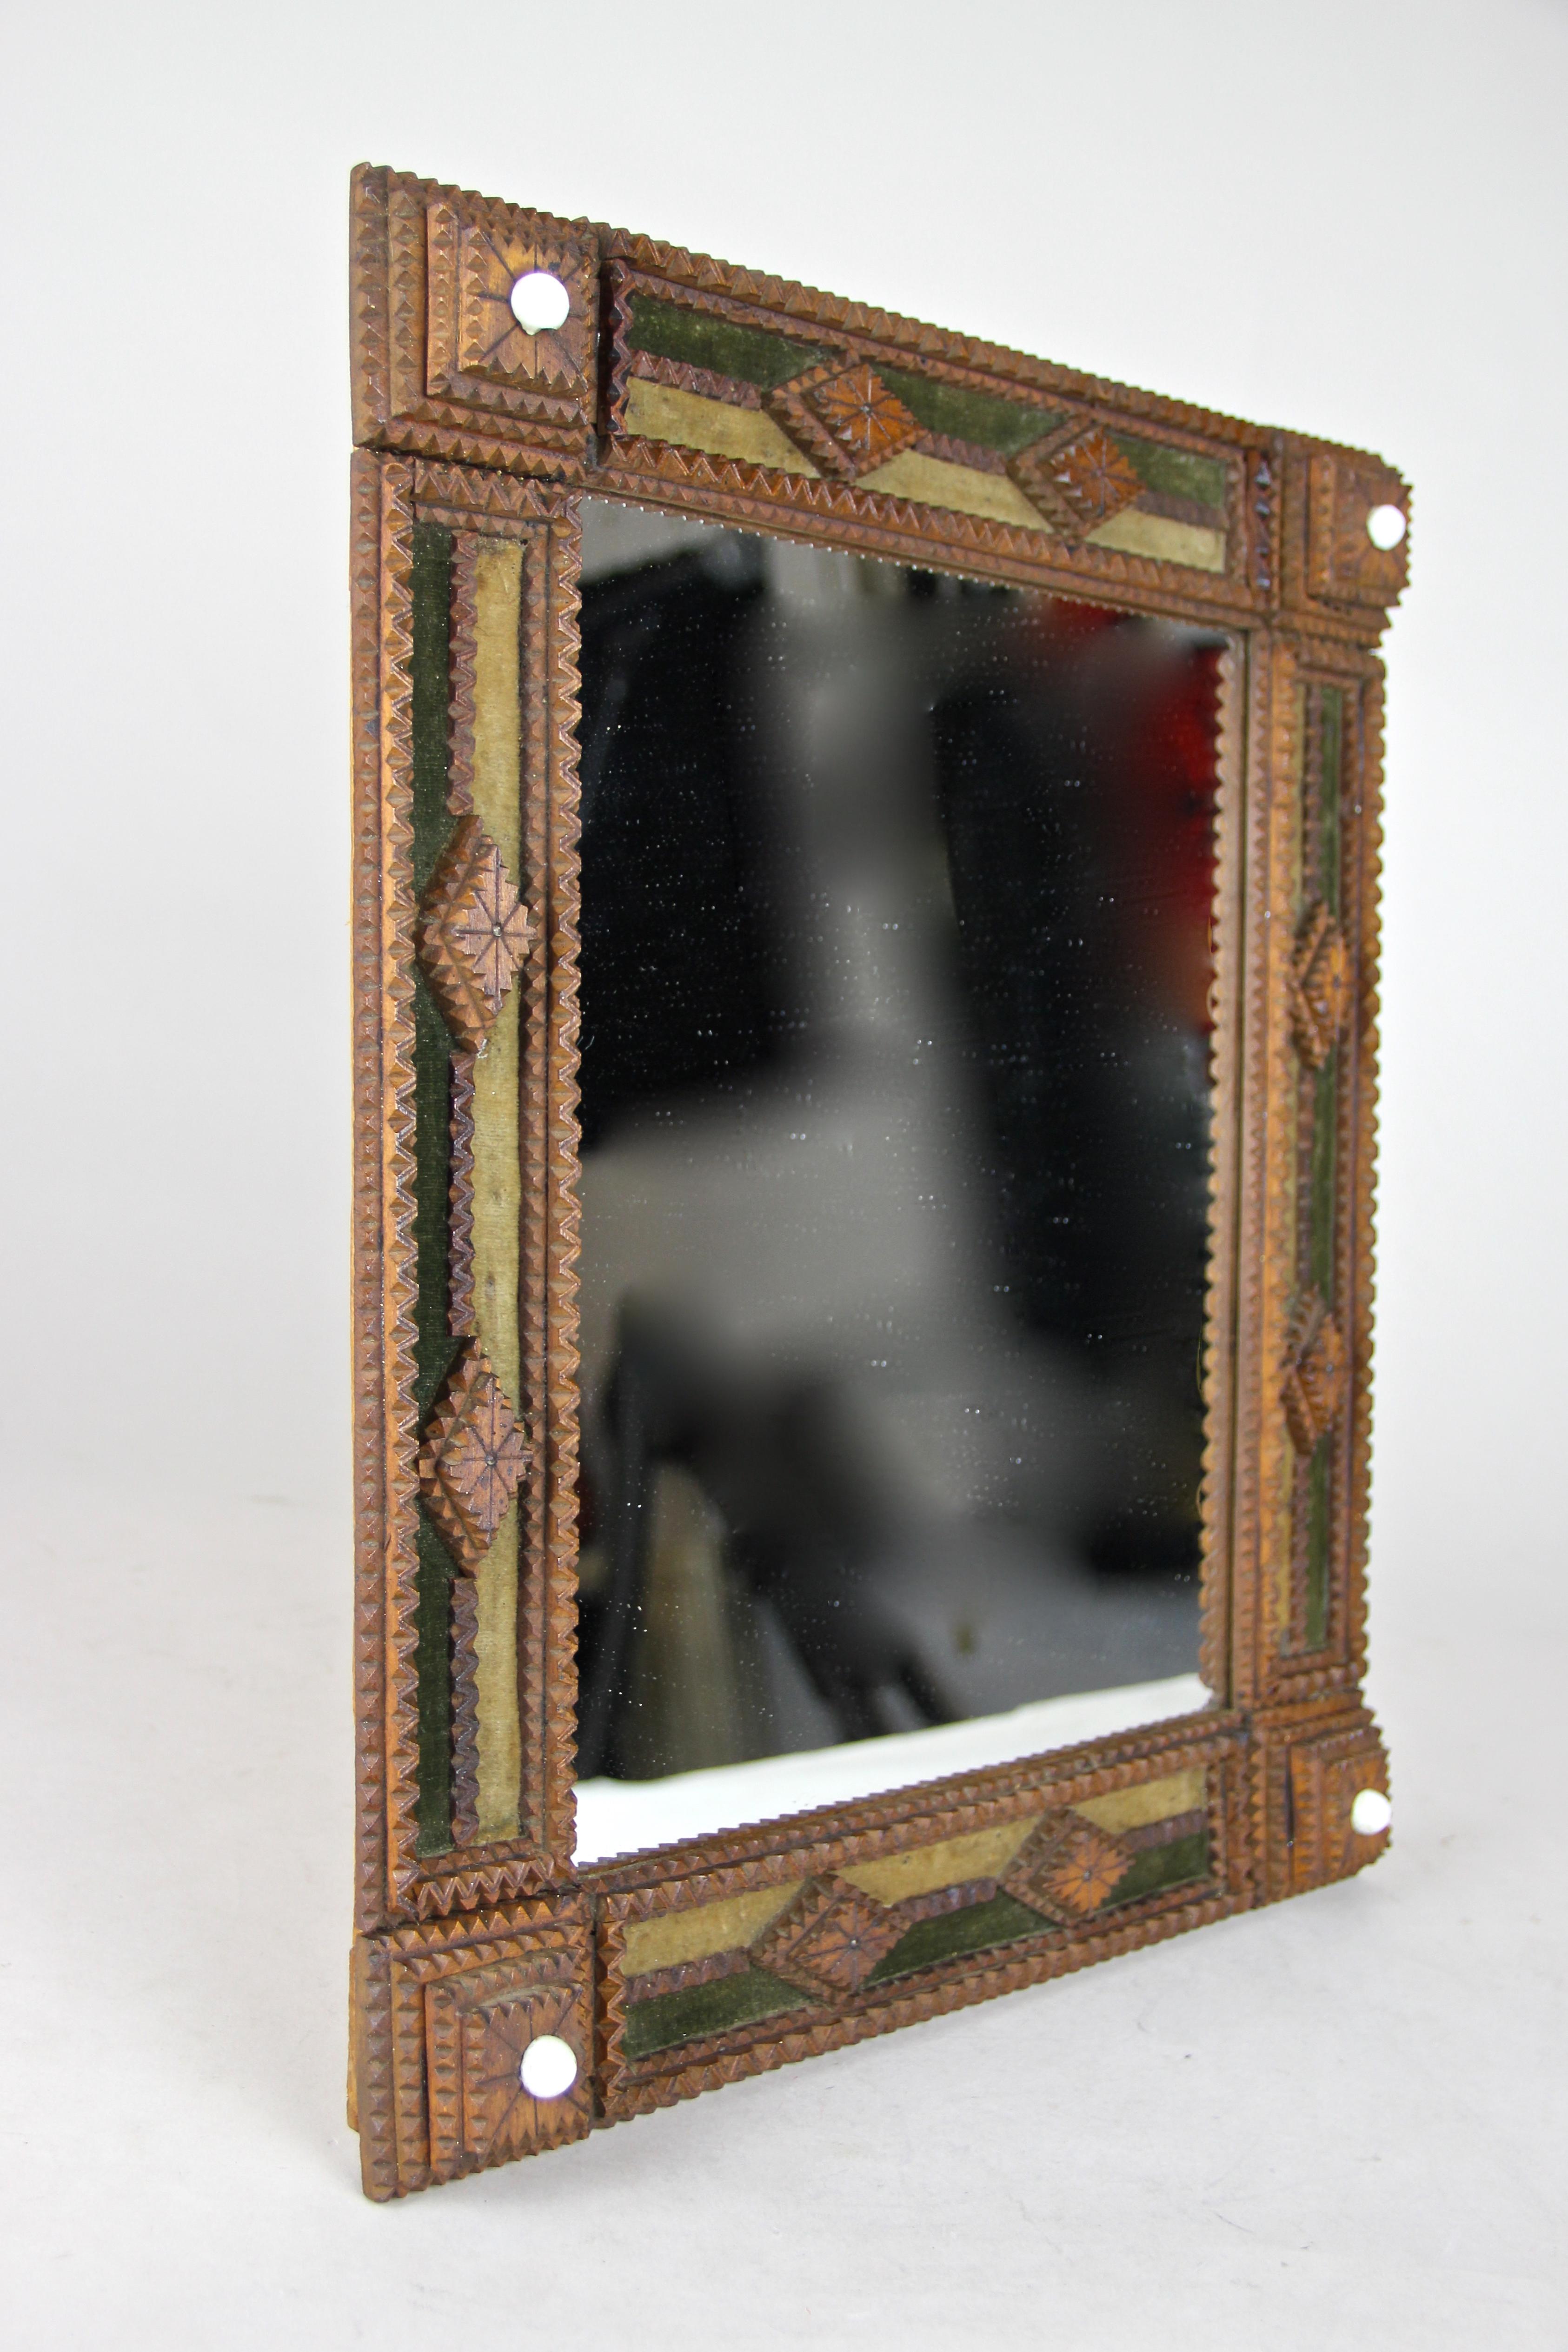 Unusual hand carved Tramp Art mirror coming from the later 19th century, circa 1870 in Austria. Made of basswood, this ornate worked 